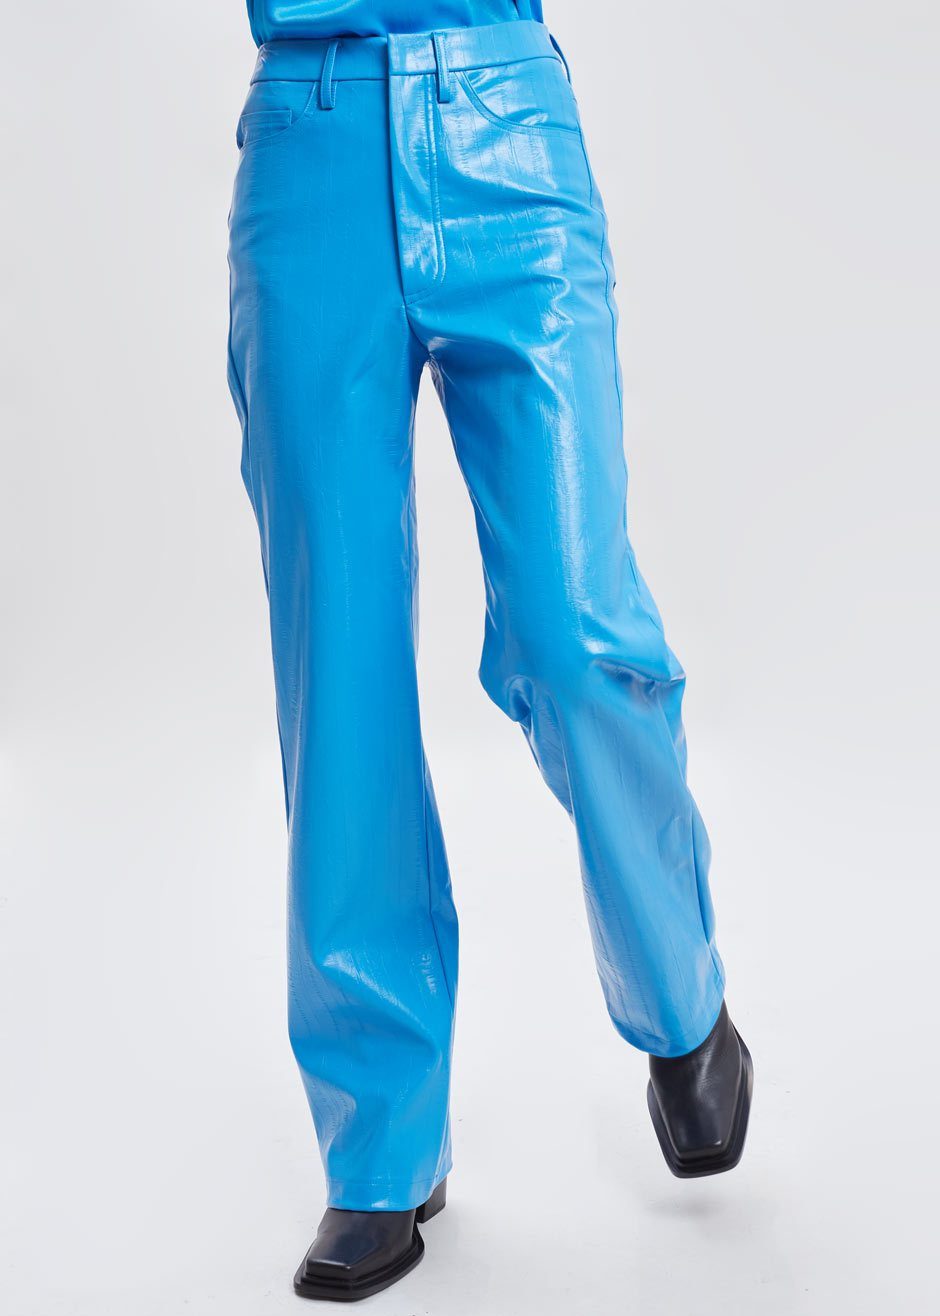 Rotie High Waist Vinyl Pants by ROTATE in Blithe - 2